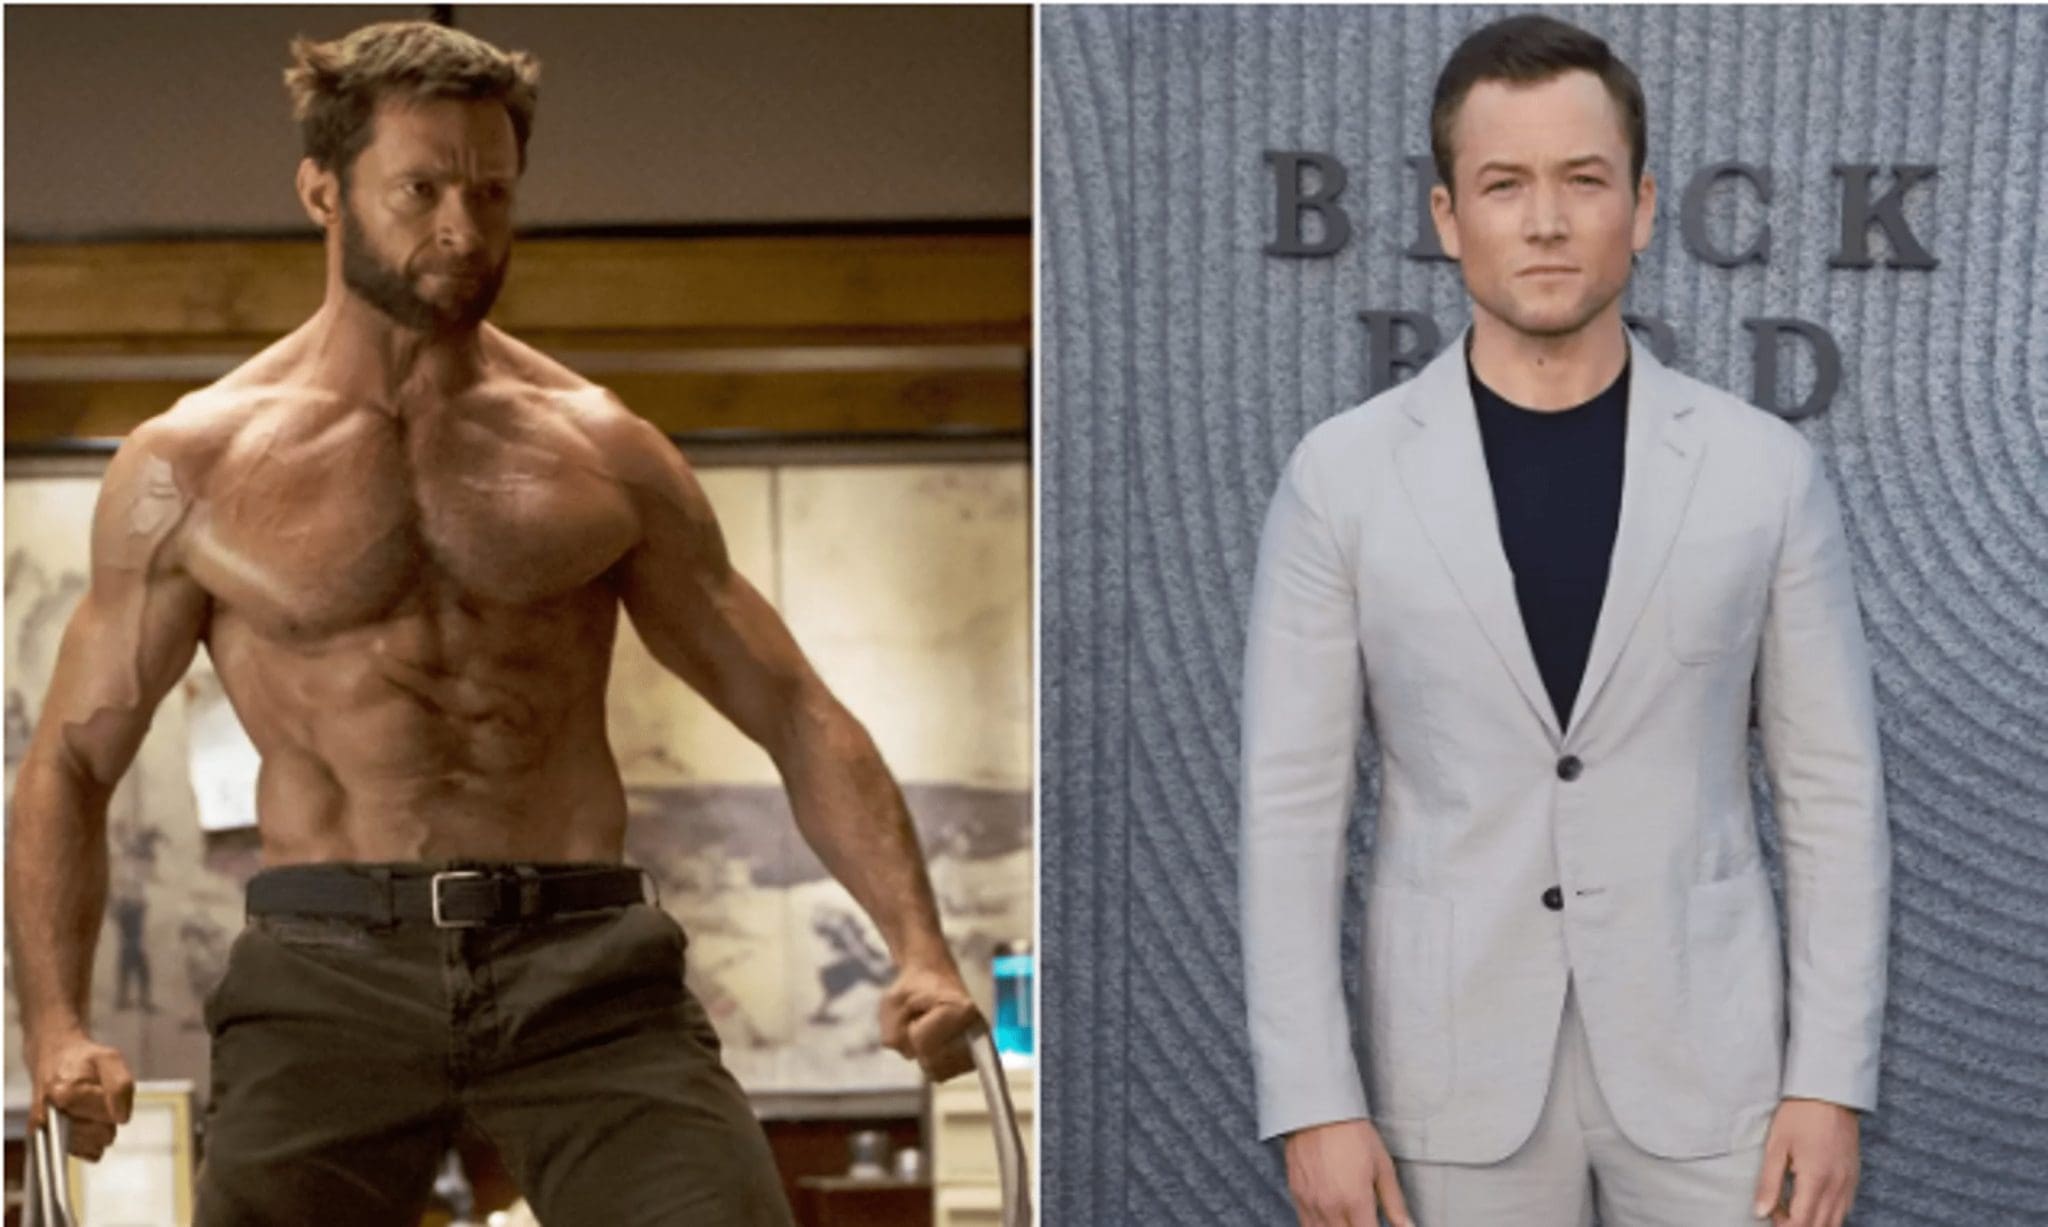 The star of the dilogy 'King's man: the secret service' claims the role of Wolverine